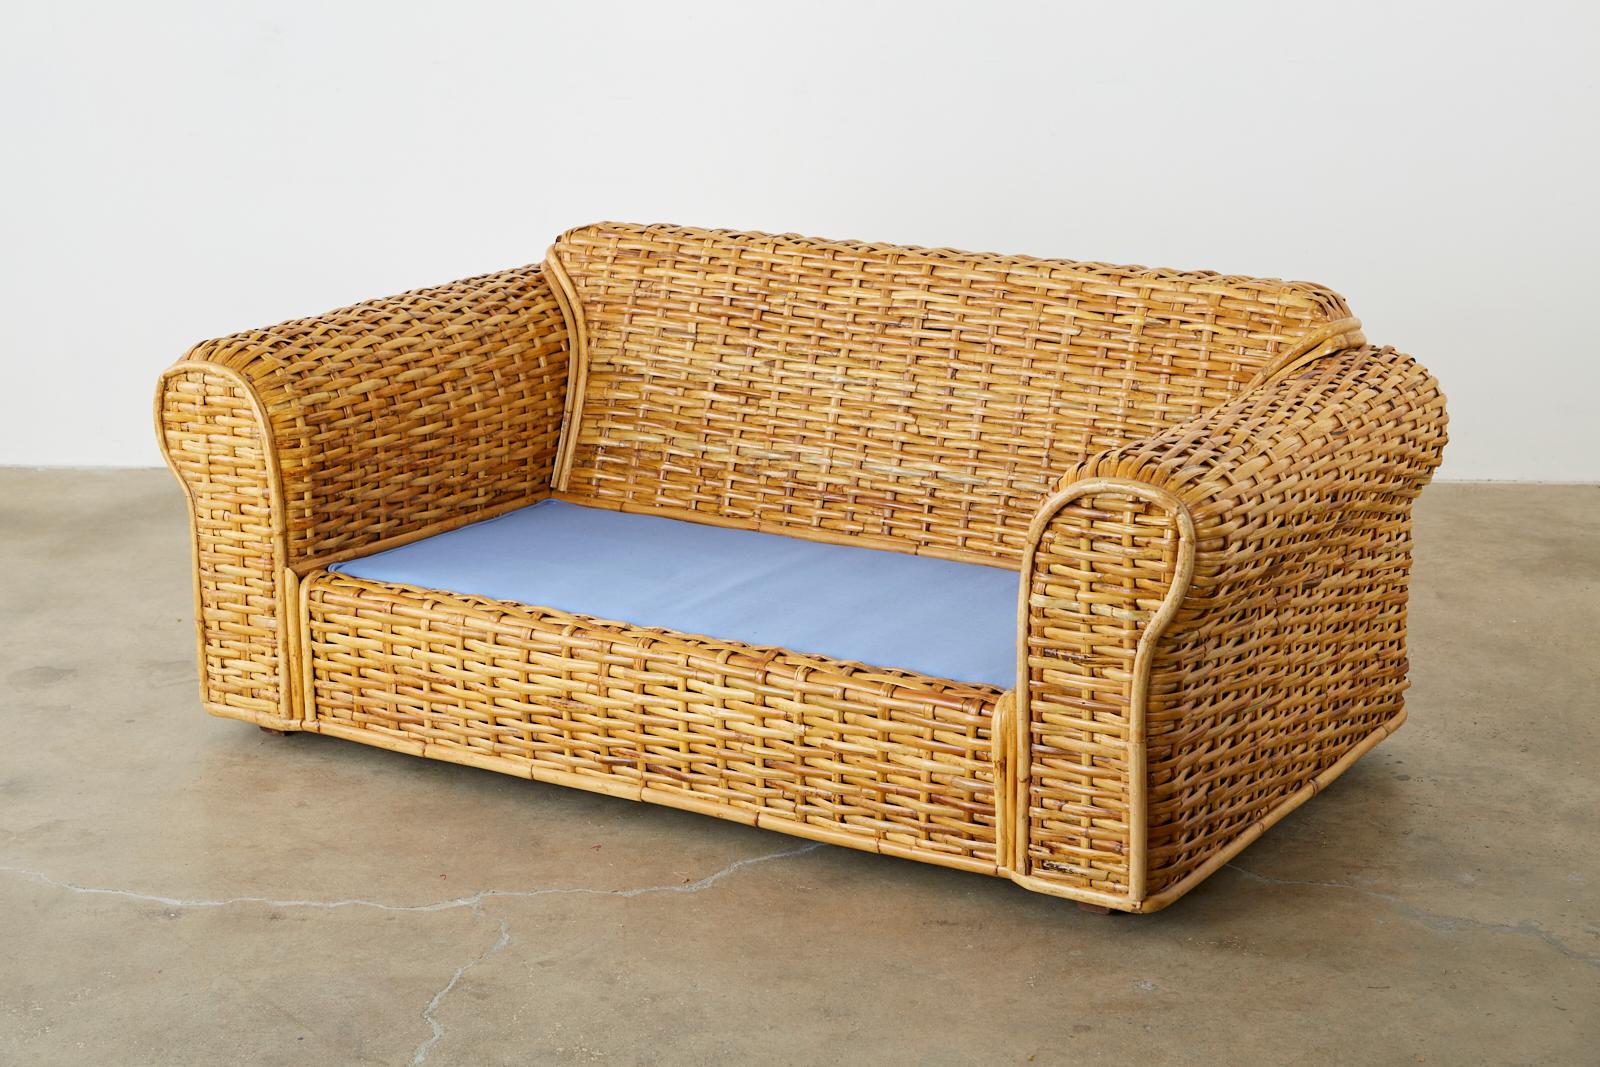 Hand-Crafted Ralph Lauren Woven Rattan Settee with Blue Ombre Upholstery